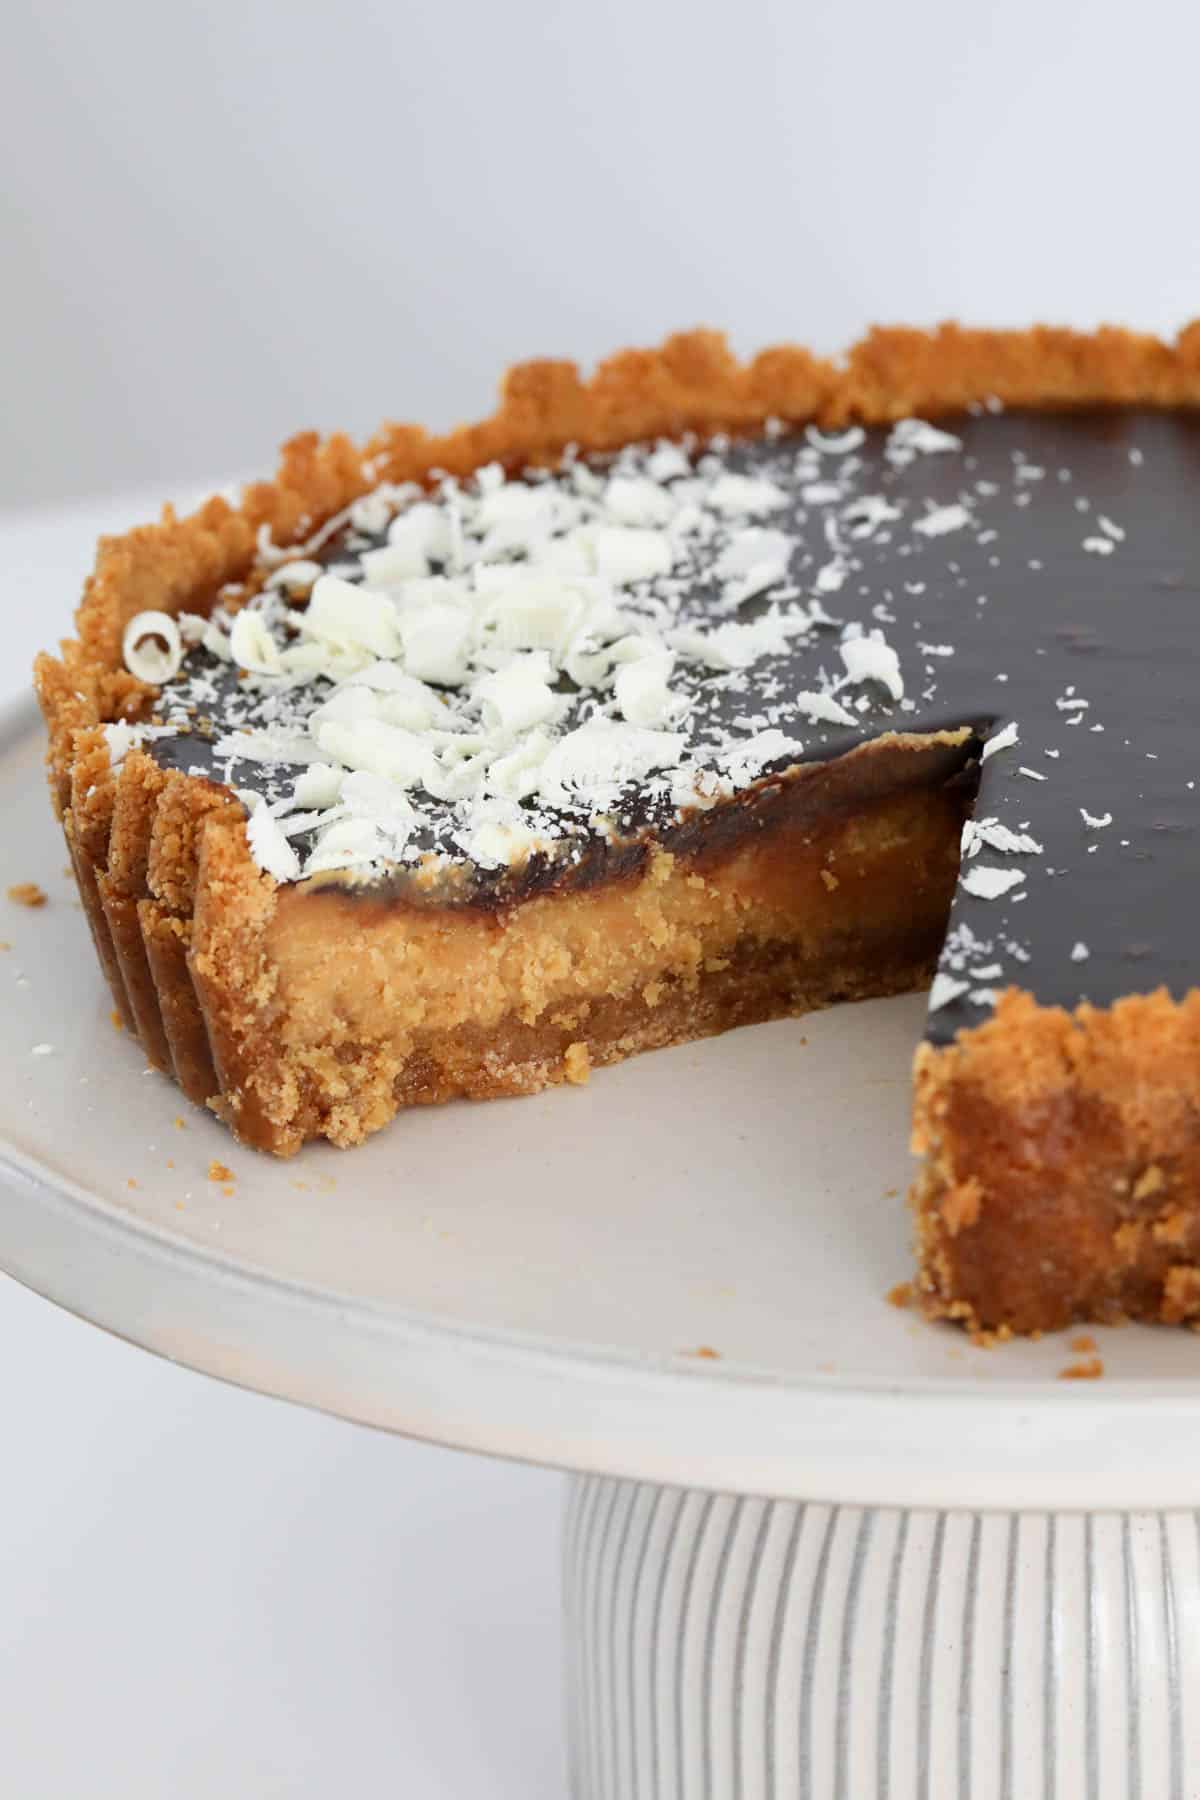 One slice removed from the tart showing the biscuit base, caramel filling and chocolate ganache on top.